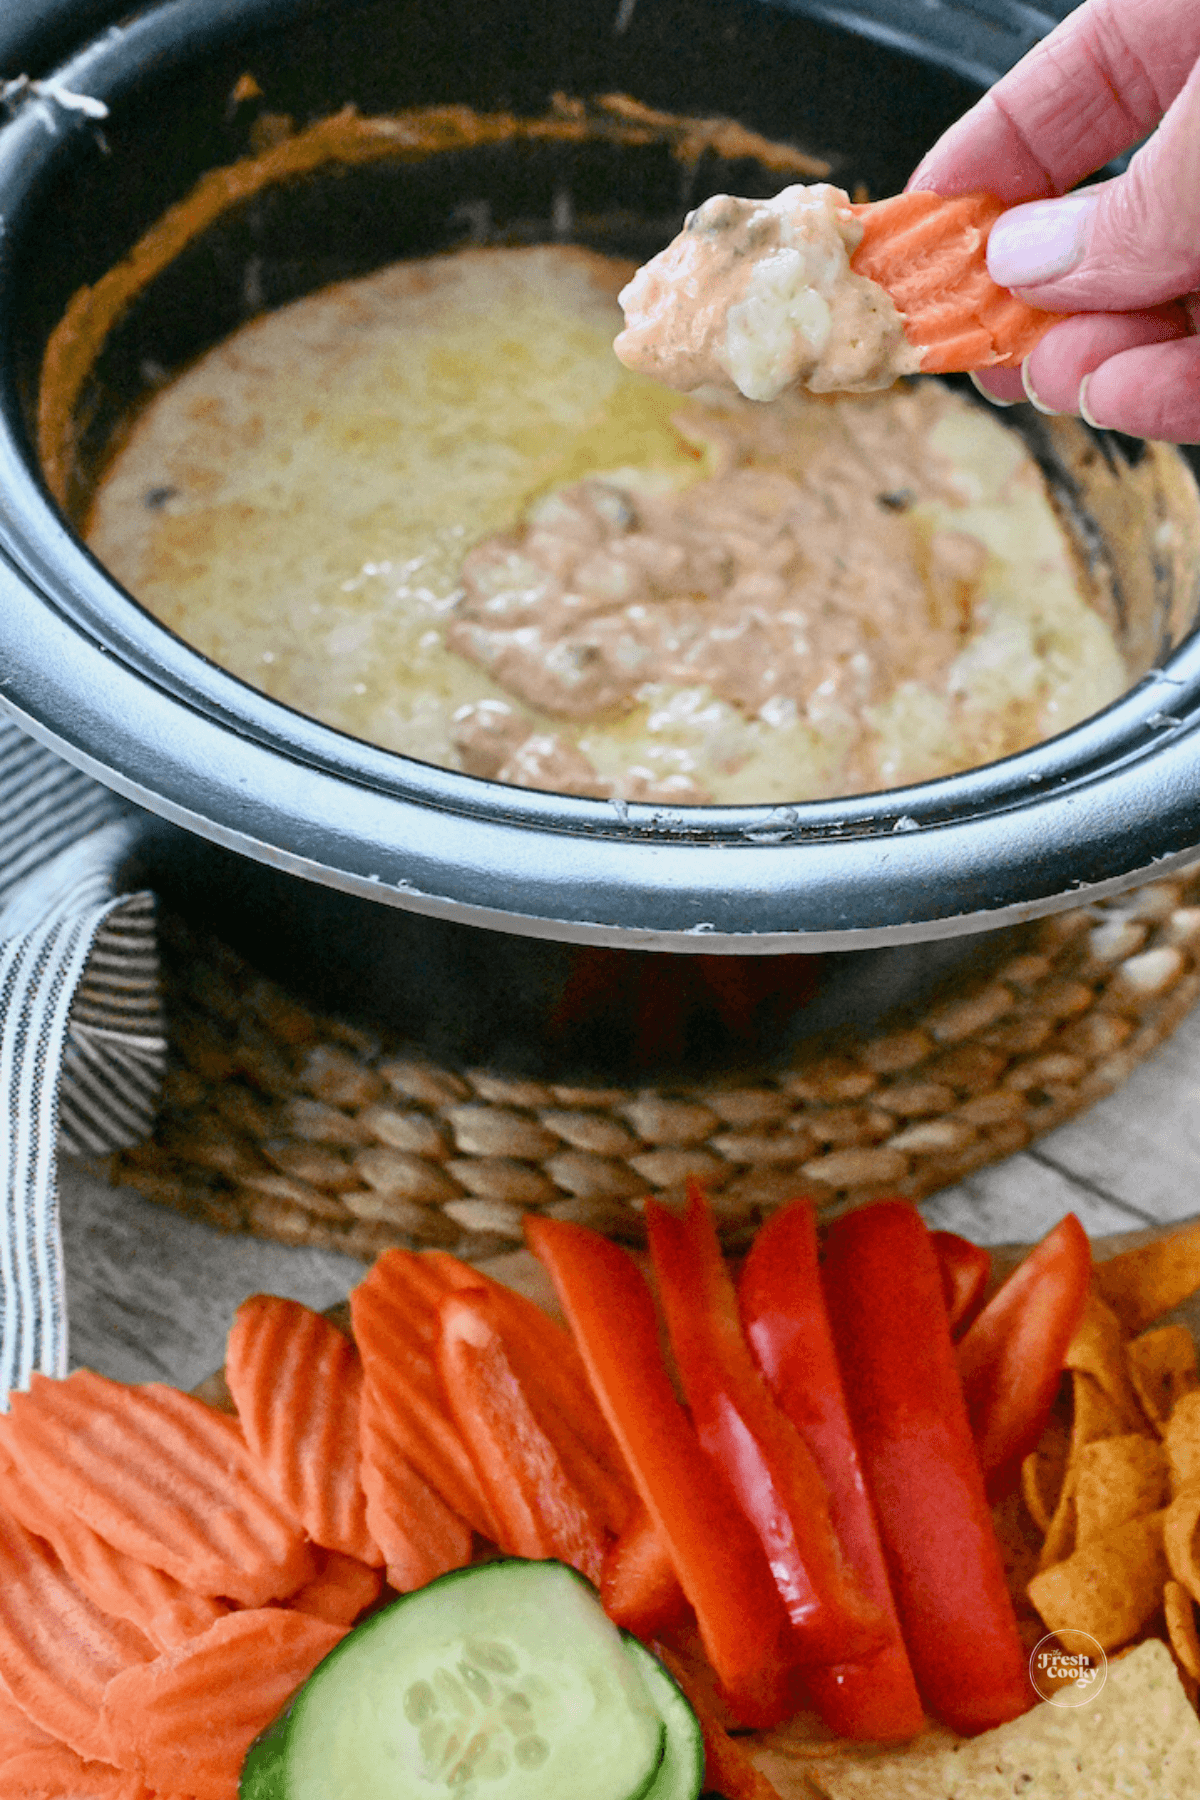 3 ingredient chili cheese dip crock pot with hand using carrot chip to scoop some of the dip.